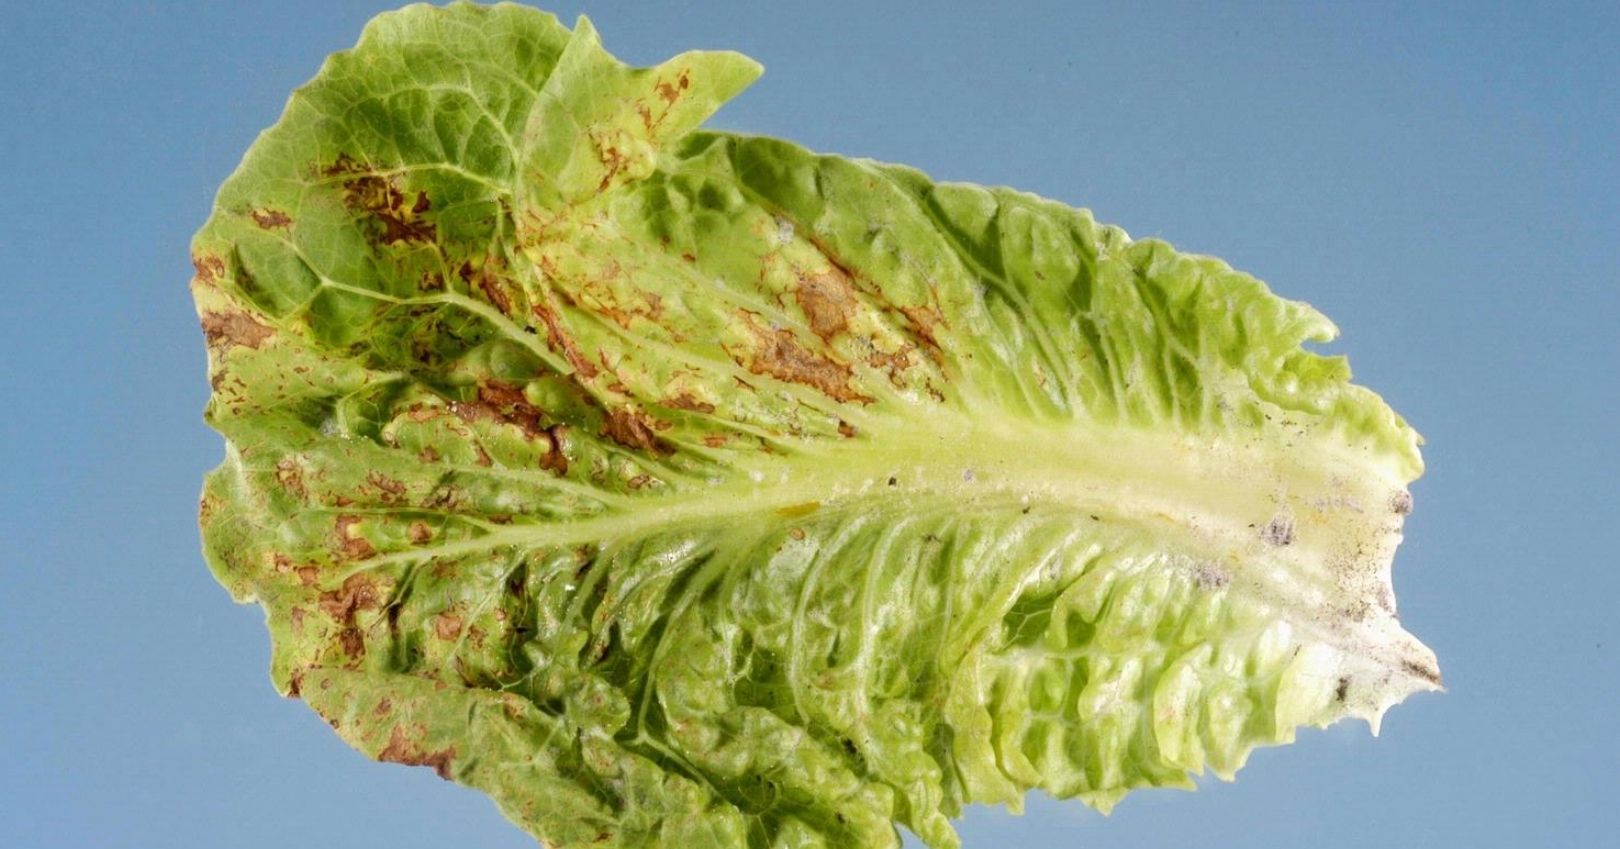 Lettuce infected with TSWV (Jeffrey W. Lotz, Florida Department of Agriculture and Consumer Services, Bugwood.org)